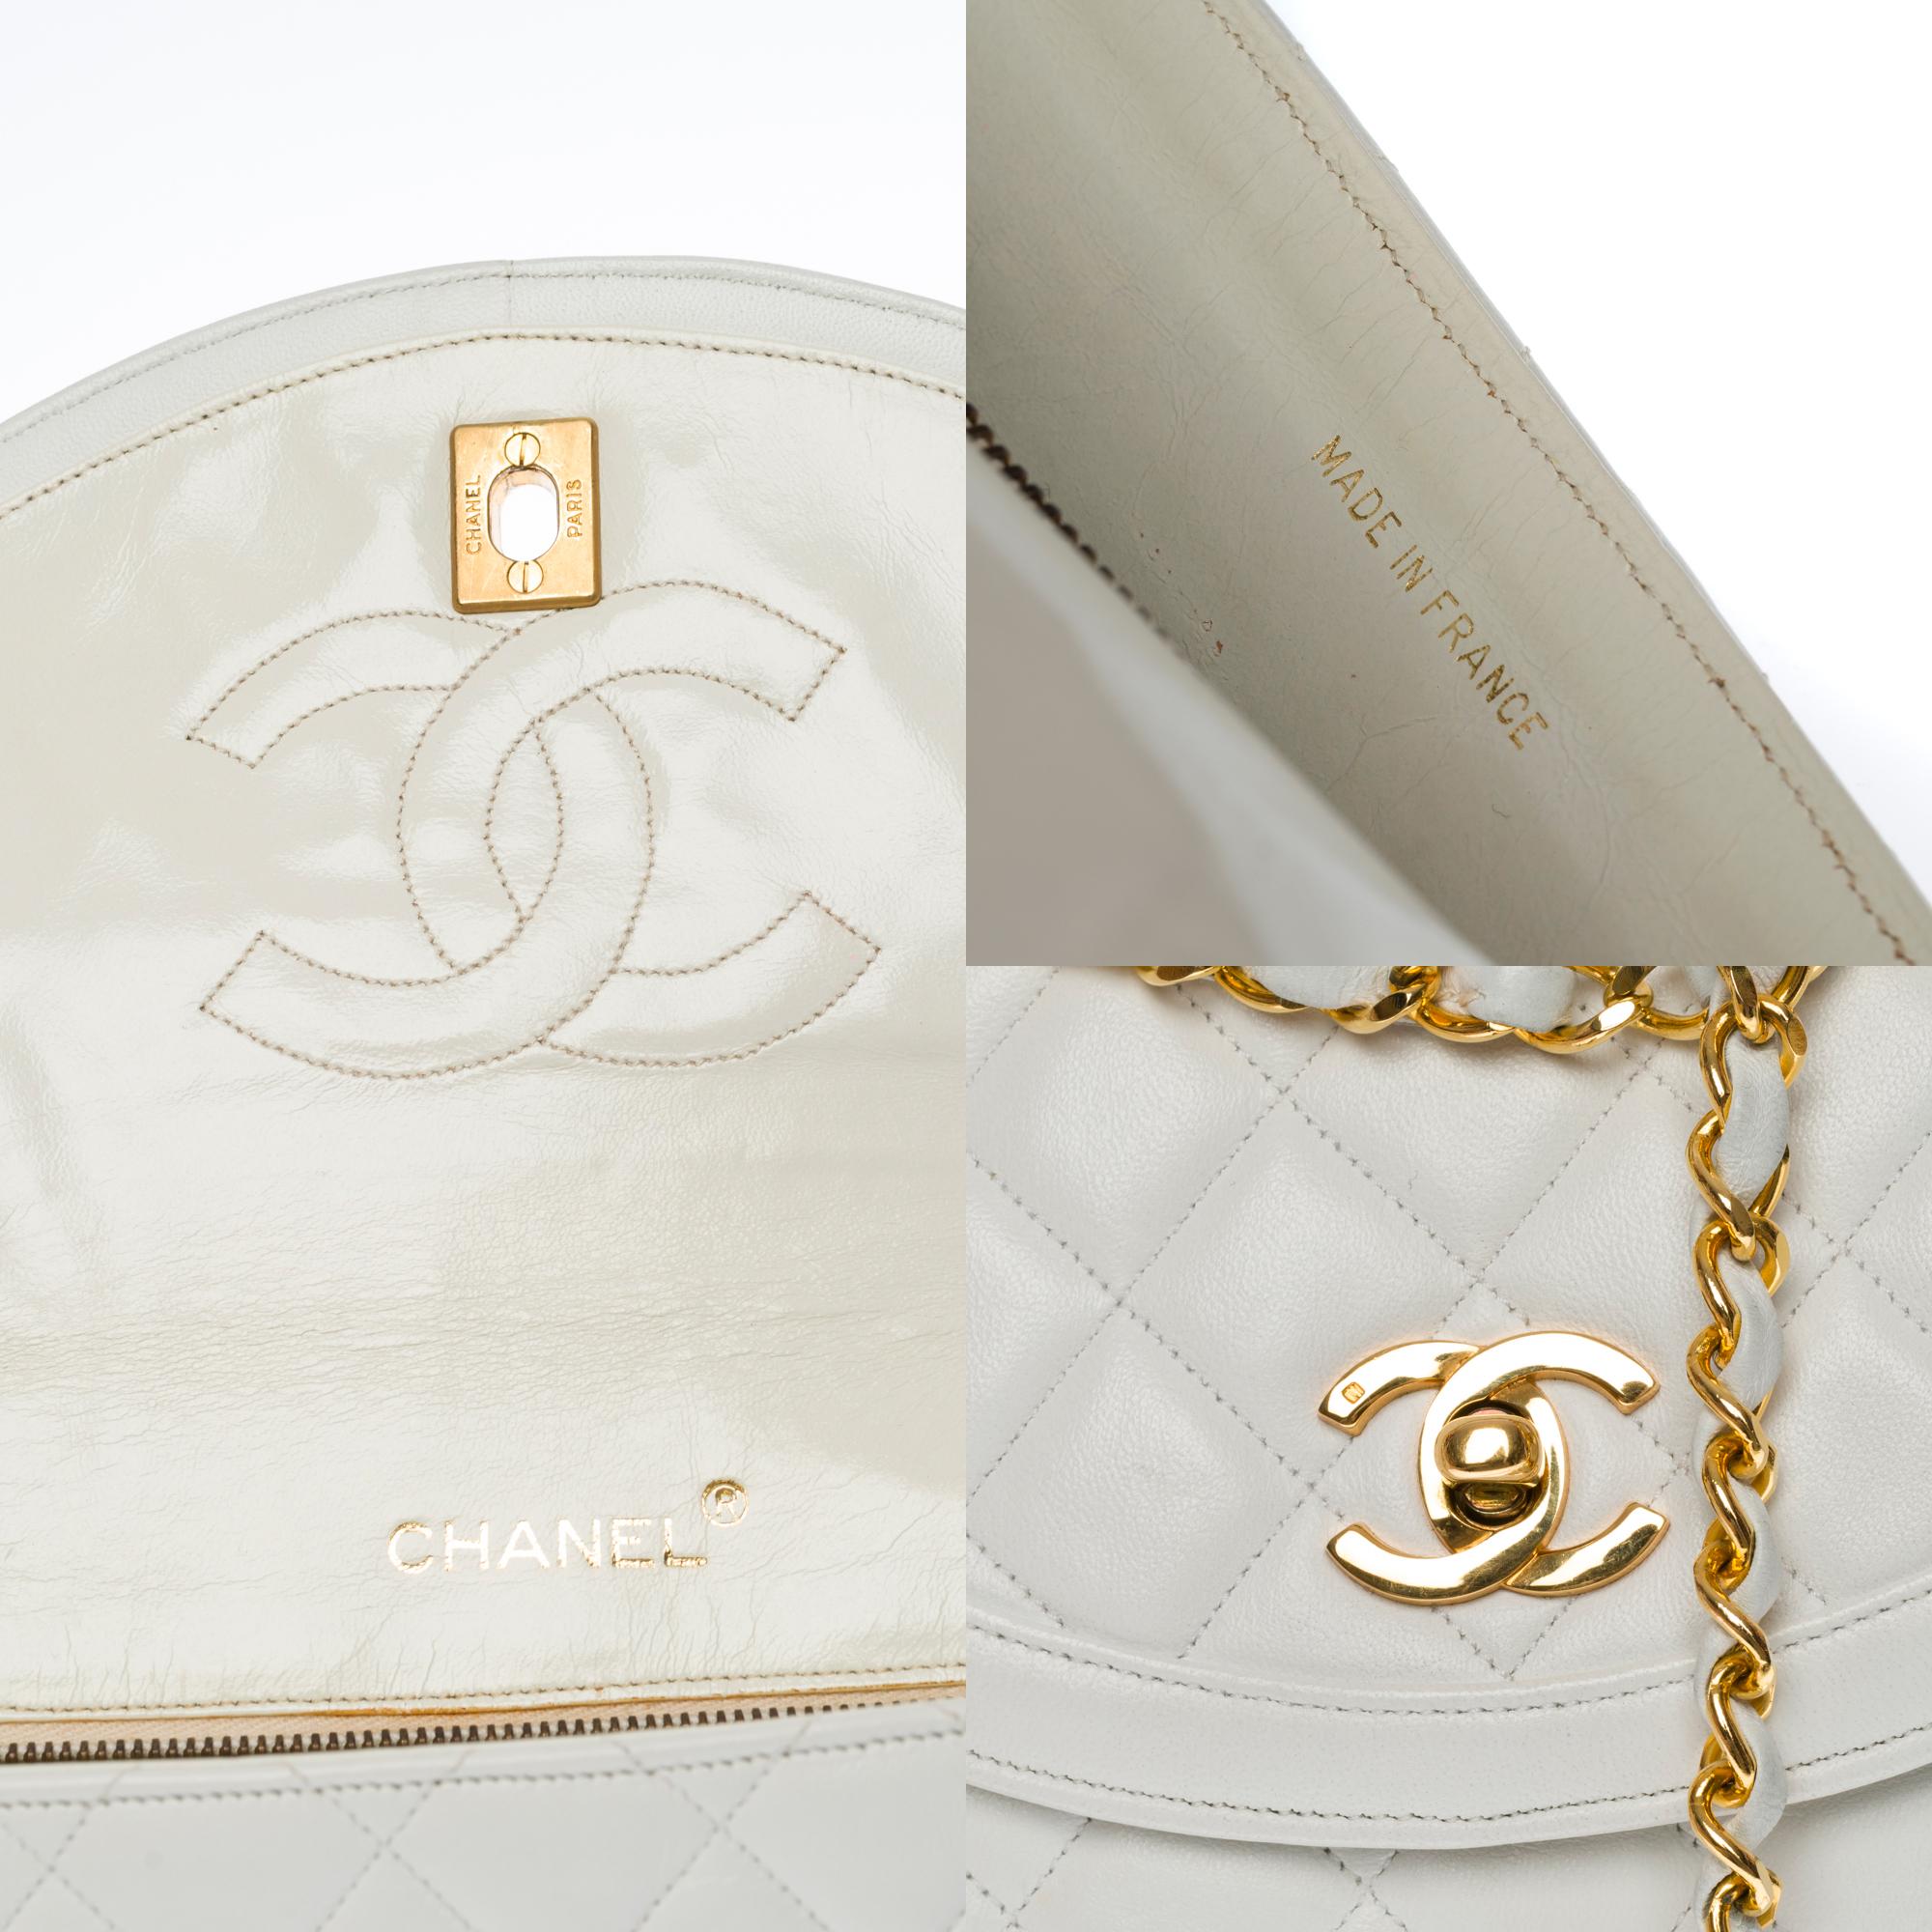 Women's Amazing Chanel Classic single Flap shoulder bag in white quilted lambskin, GHW